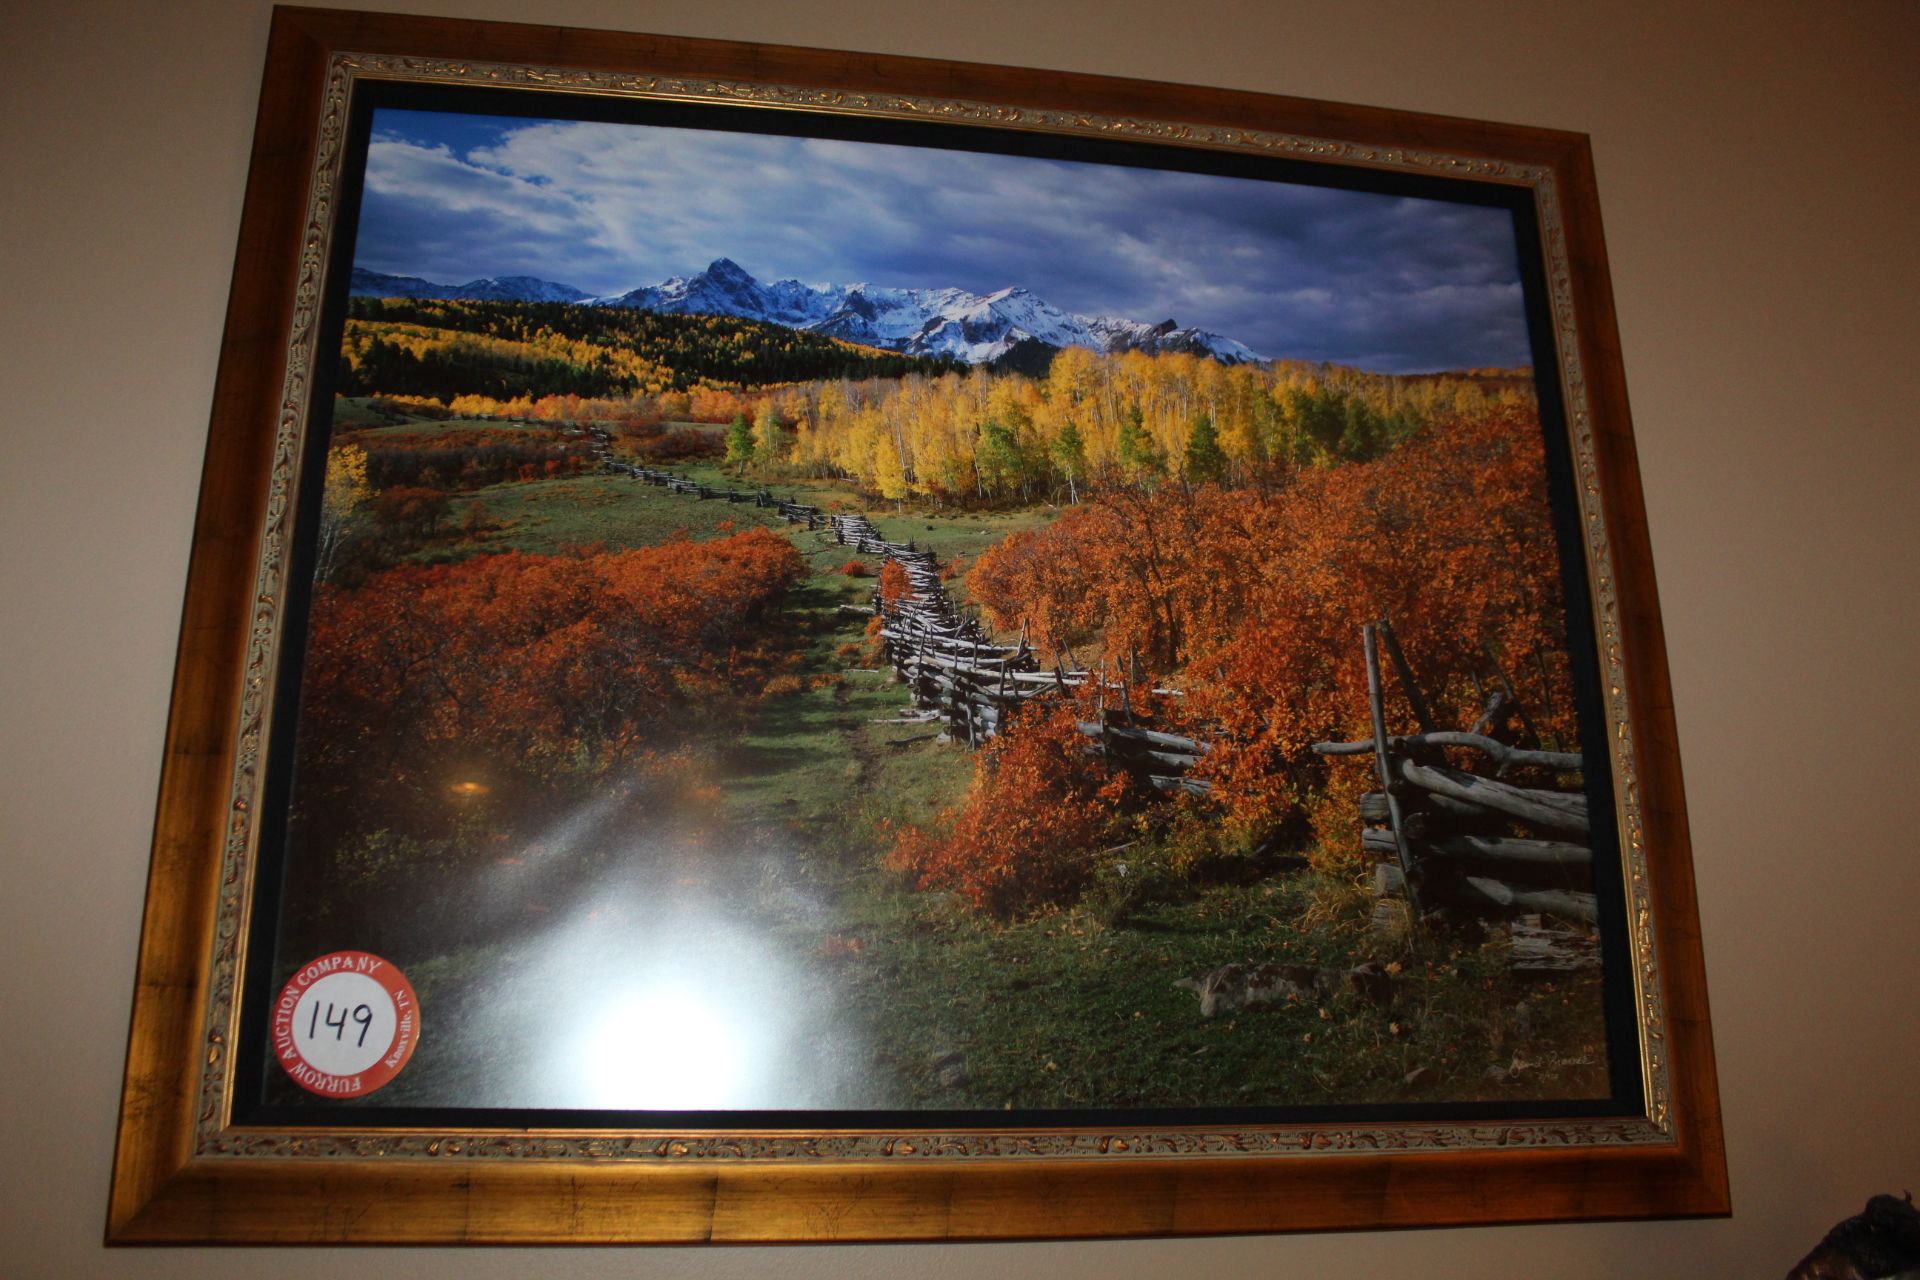 Framed Under Glass David Brookover Print, Signed & Numbered # 51 of 450, Rocky Mountain Scene - Image 3 of 3